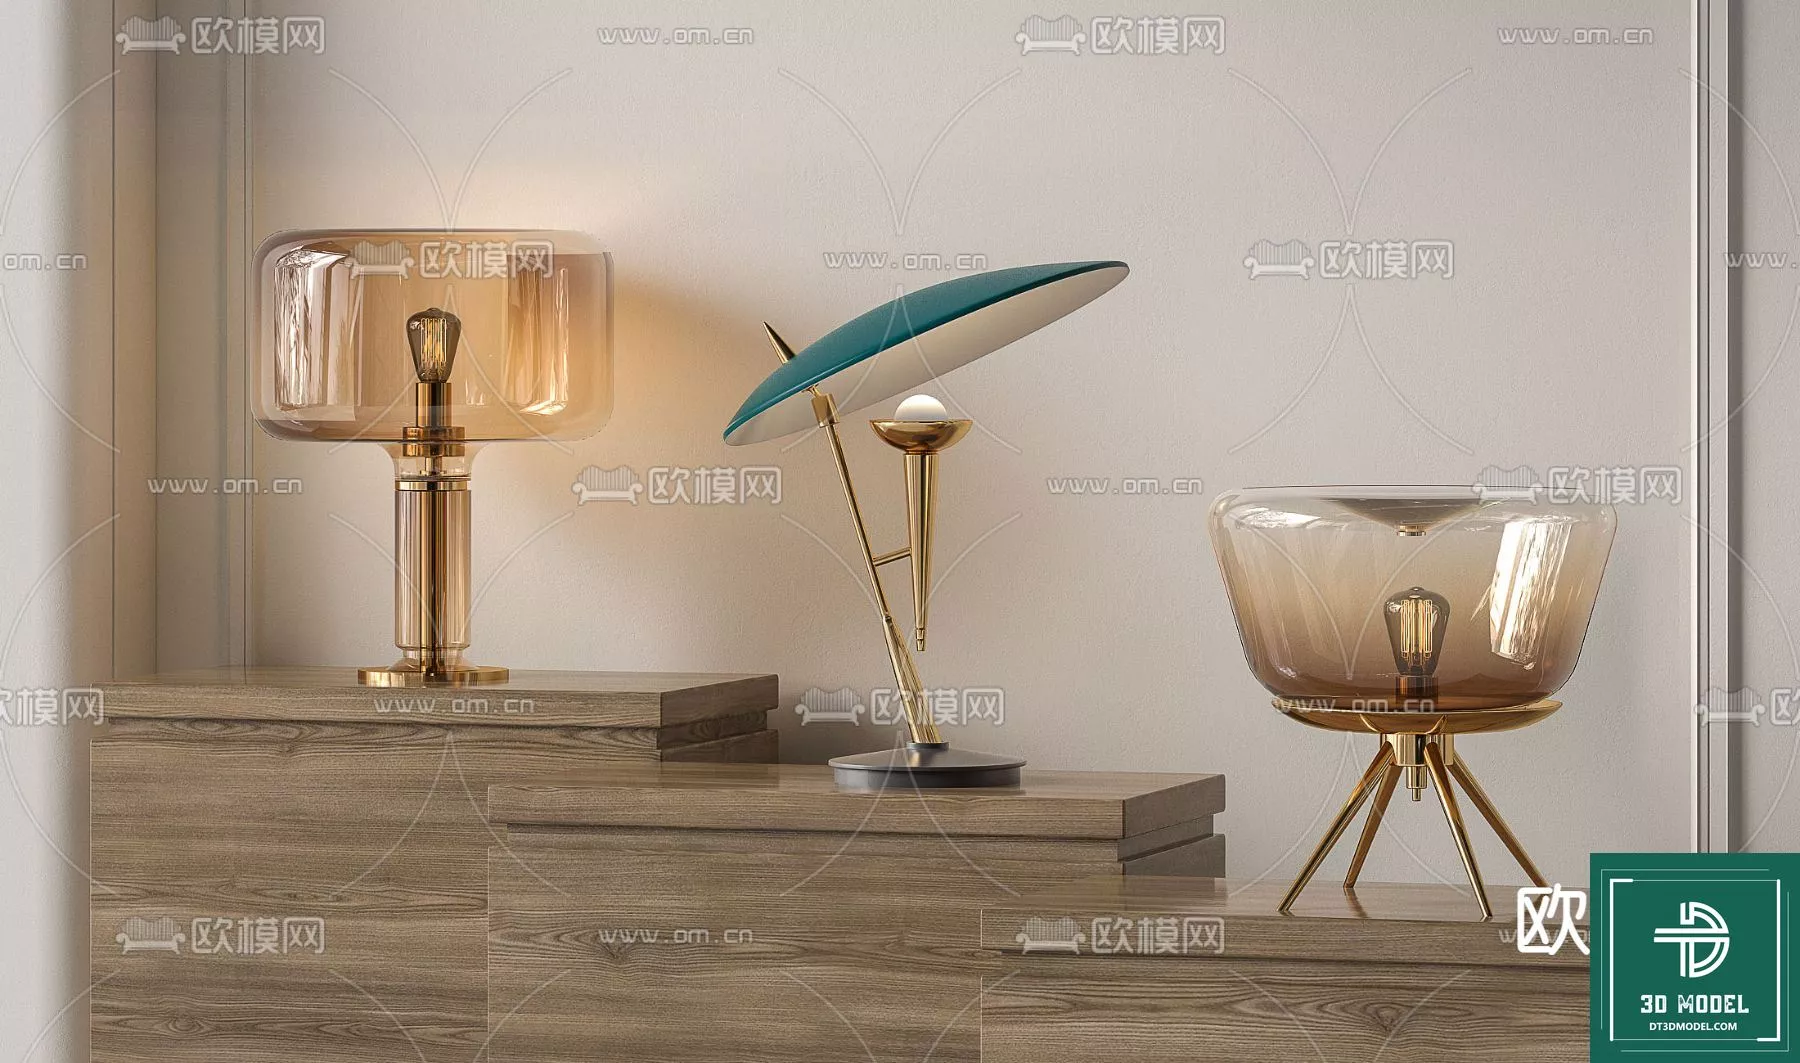 MODERN TABLE LAMP - SKETCHUP 3D MODEL - VRAY OR ENSCAPE - ID14560